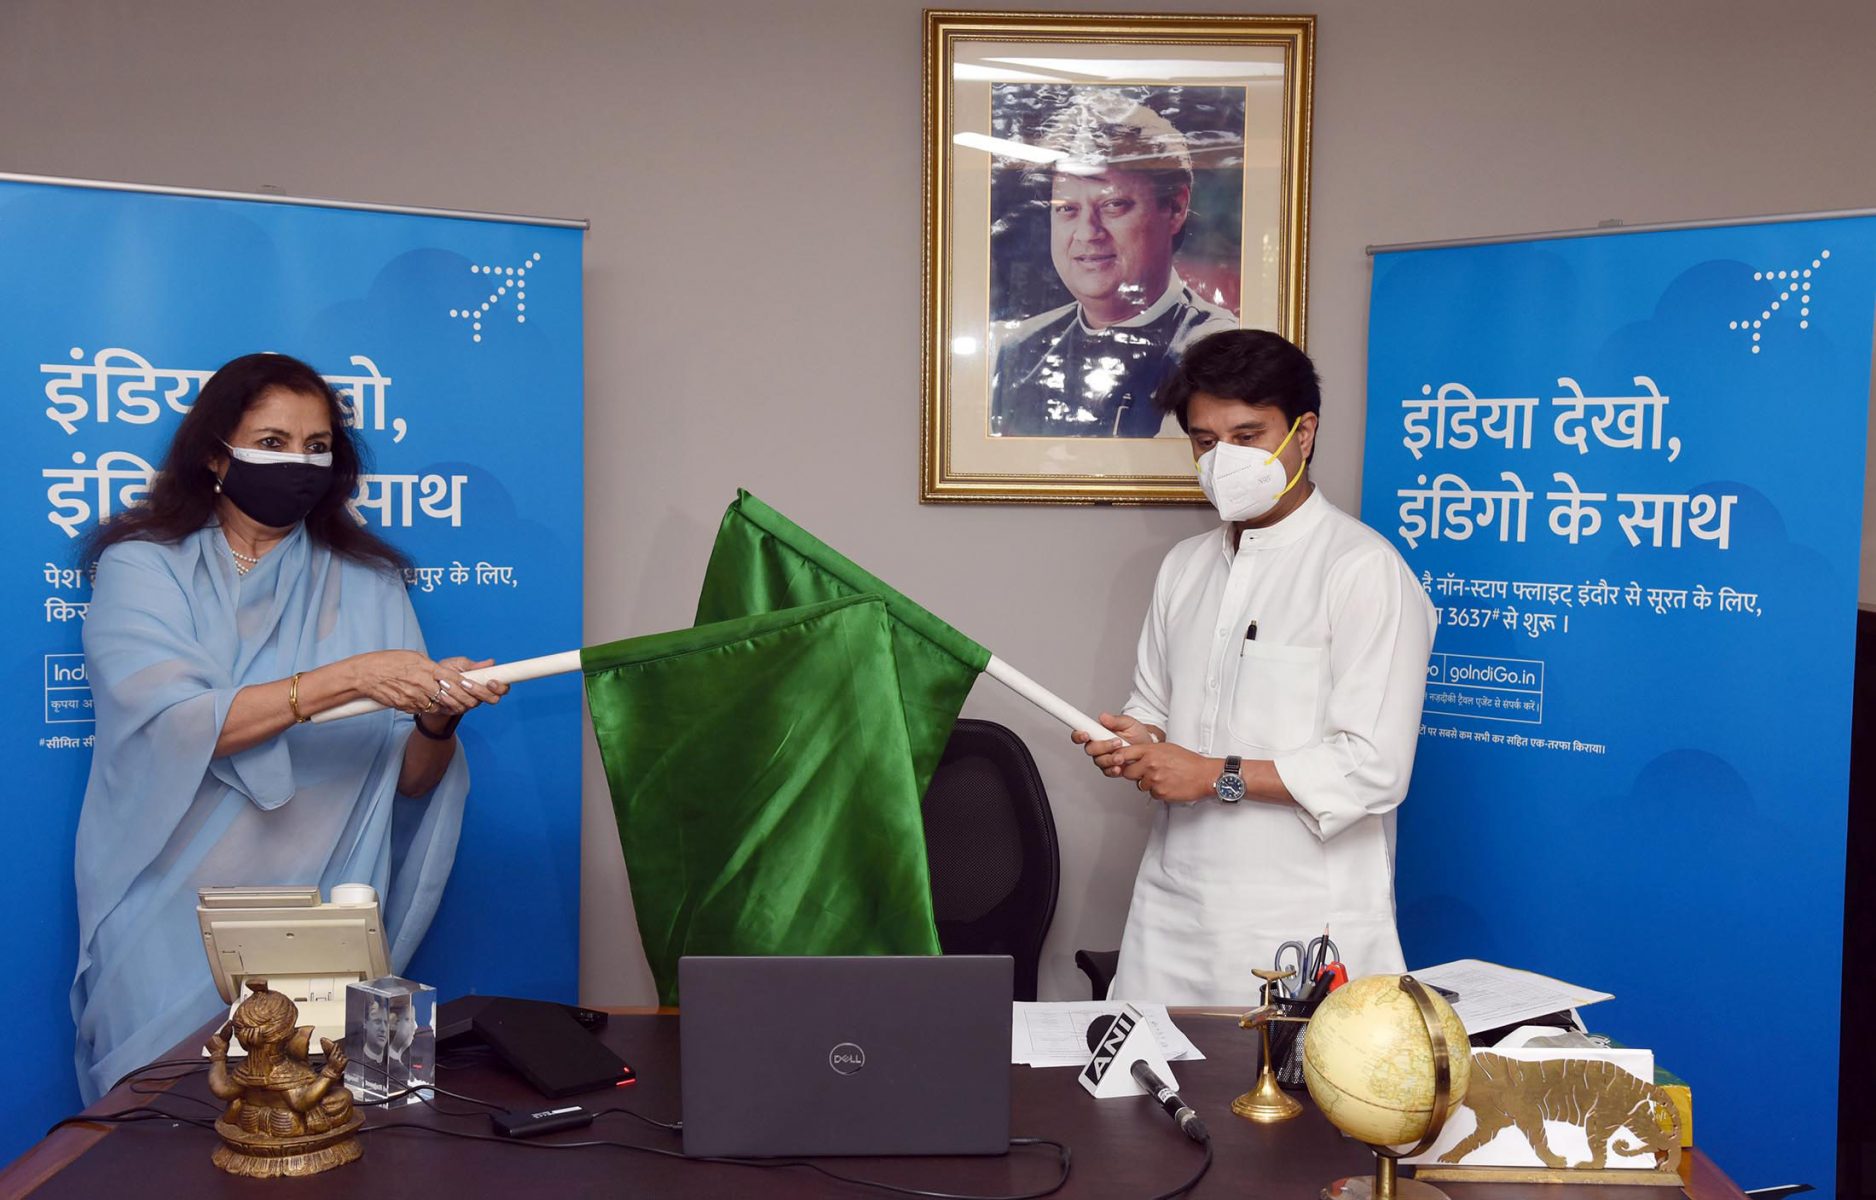 The Union Minister for Civil Aviation Jyotiraditya M. Scindia virtually flagging off to inaugurate the direct flight between Indore and Prayagraj, at a function, in New Delhi on October 31, 2021.